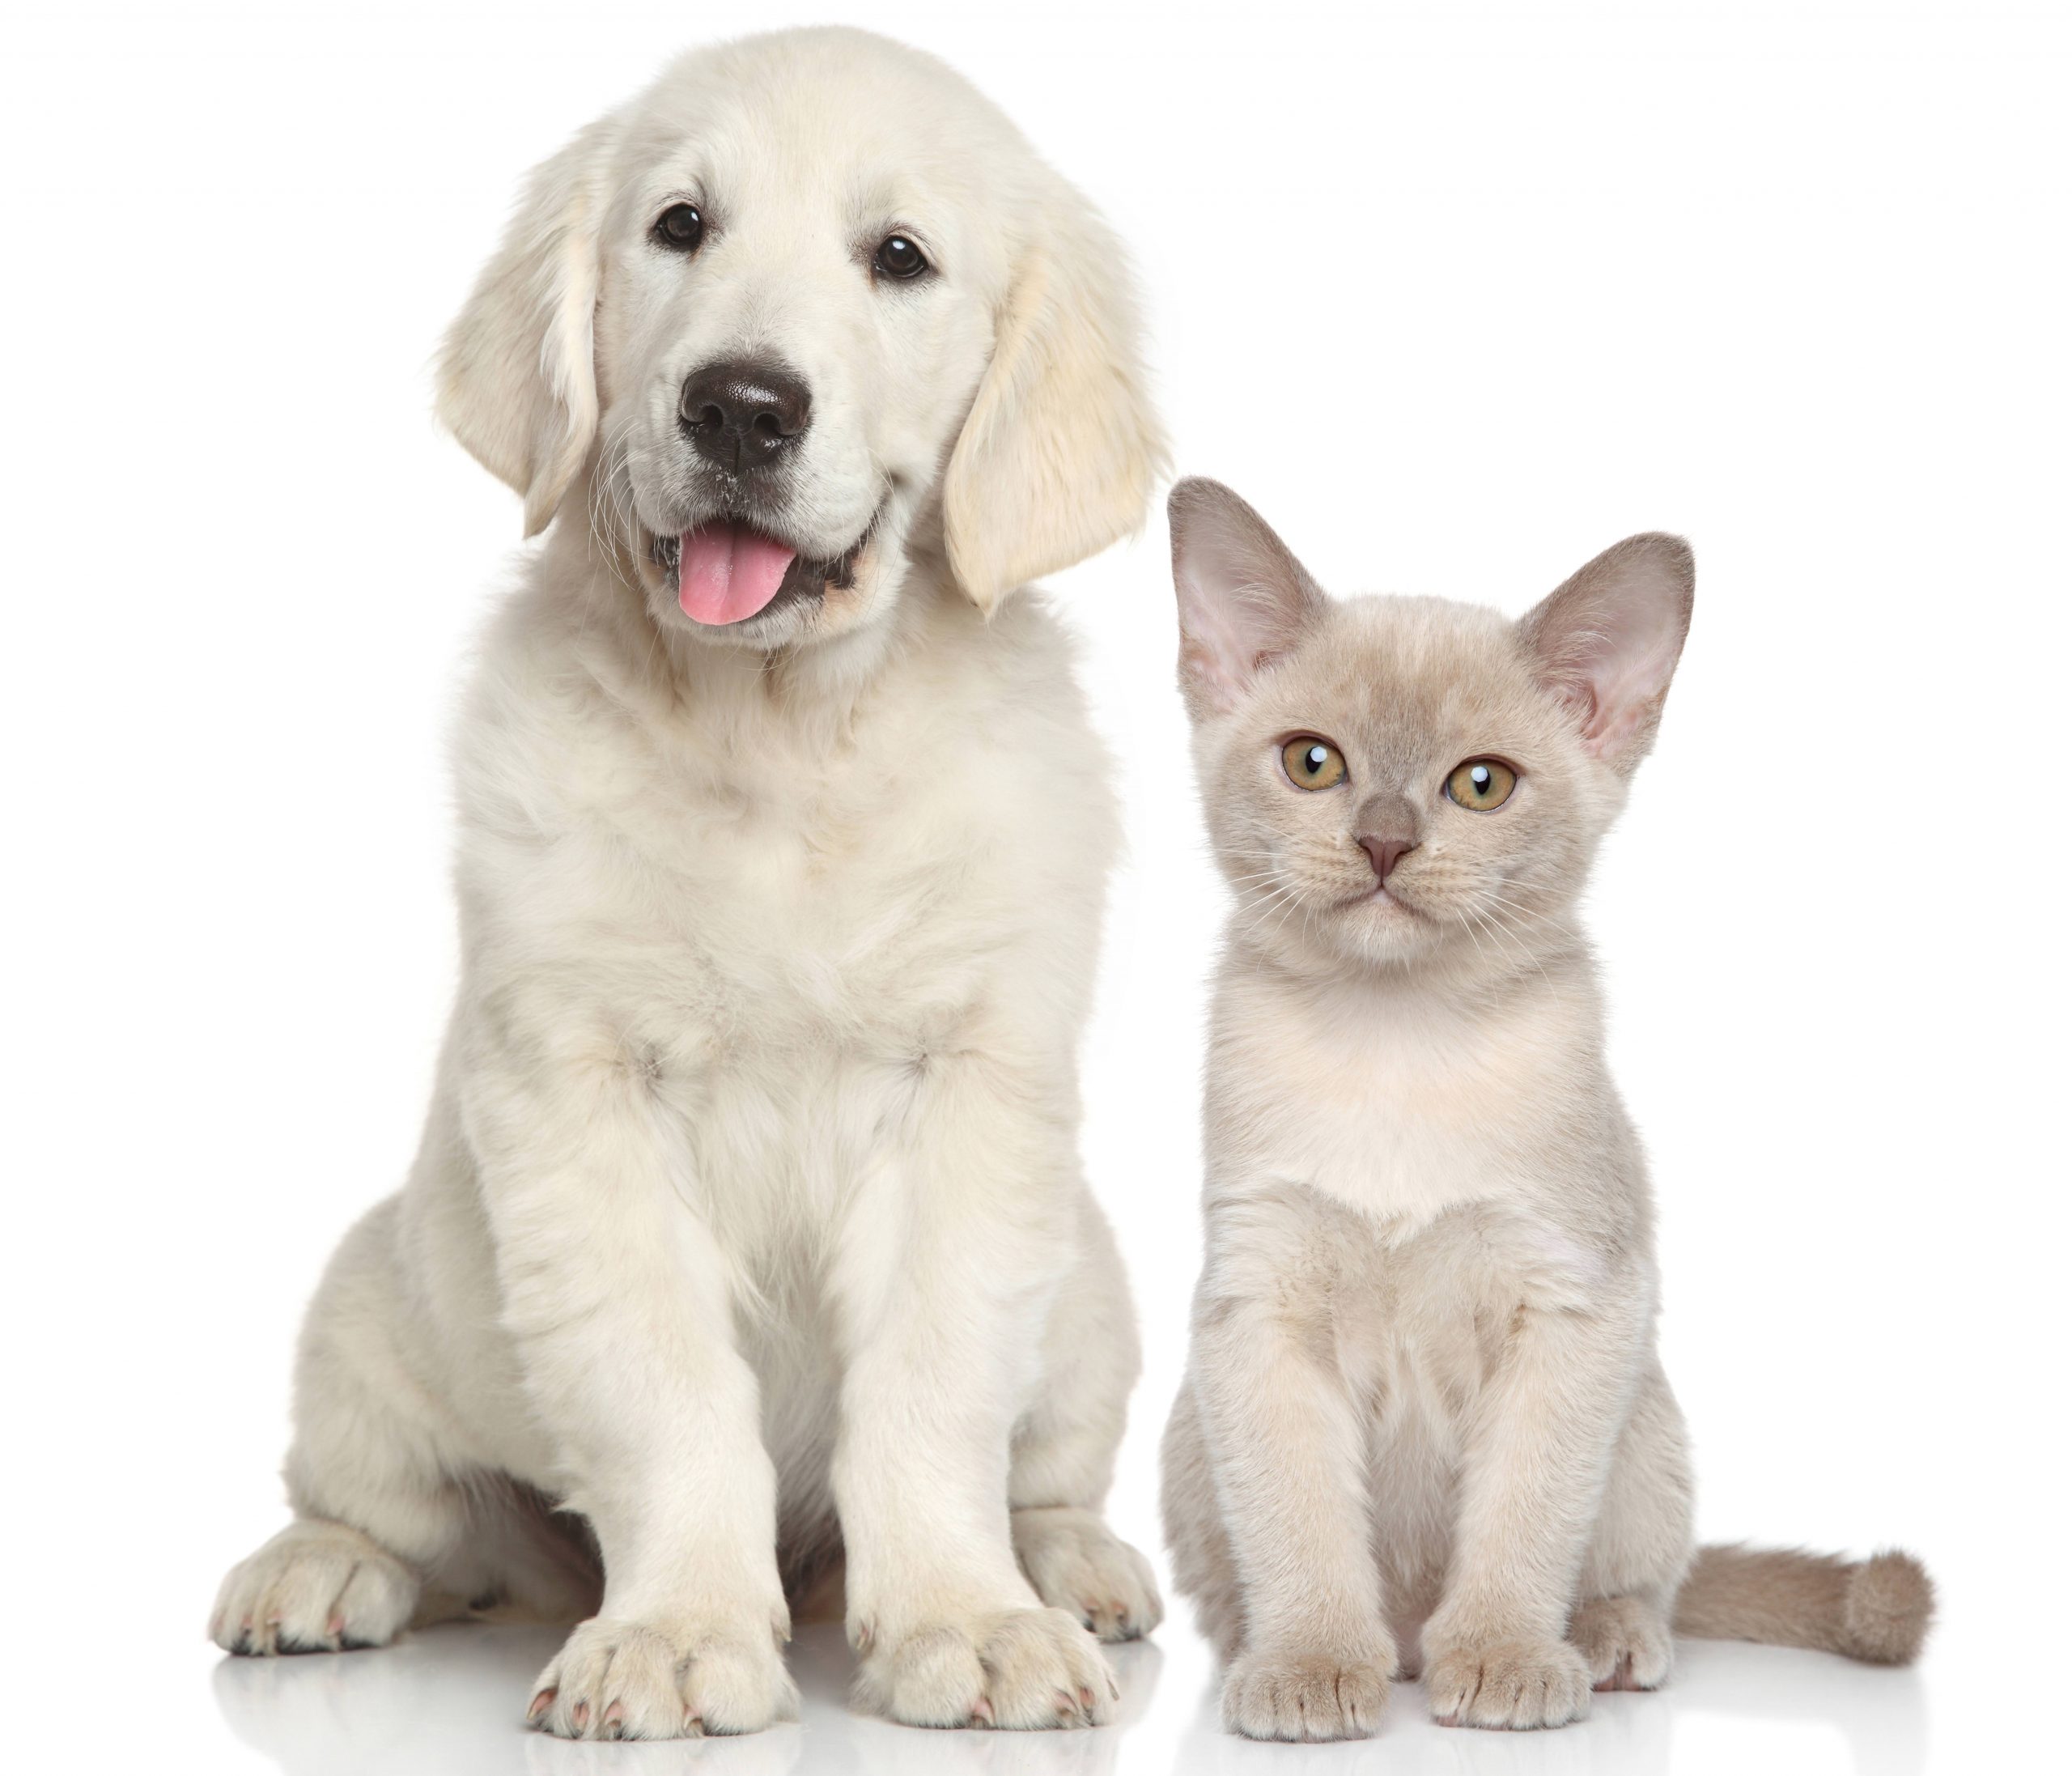 5 Questions For Deciding Between Cats And Dogs